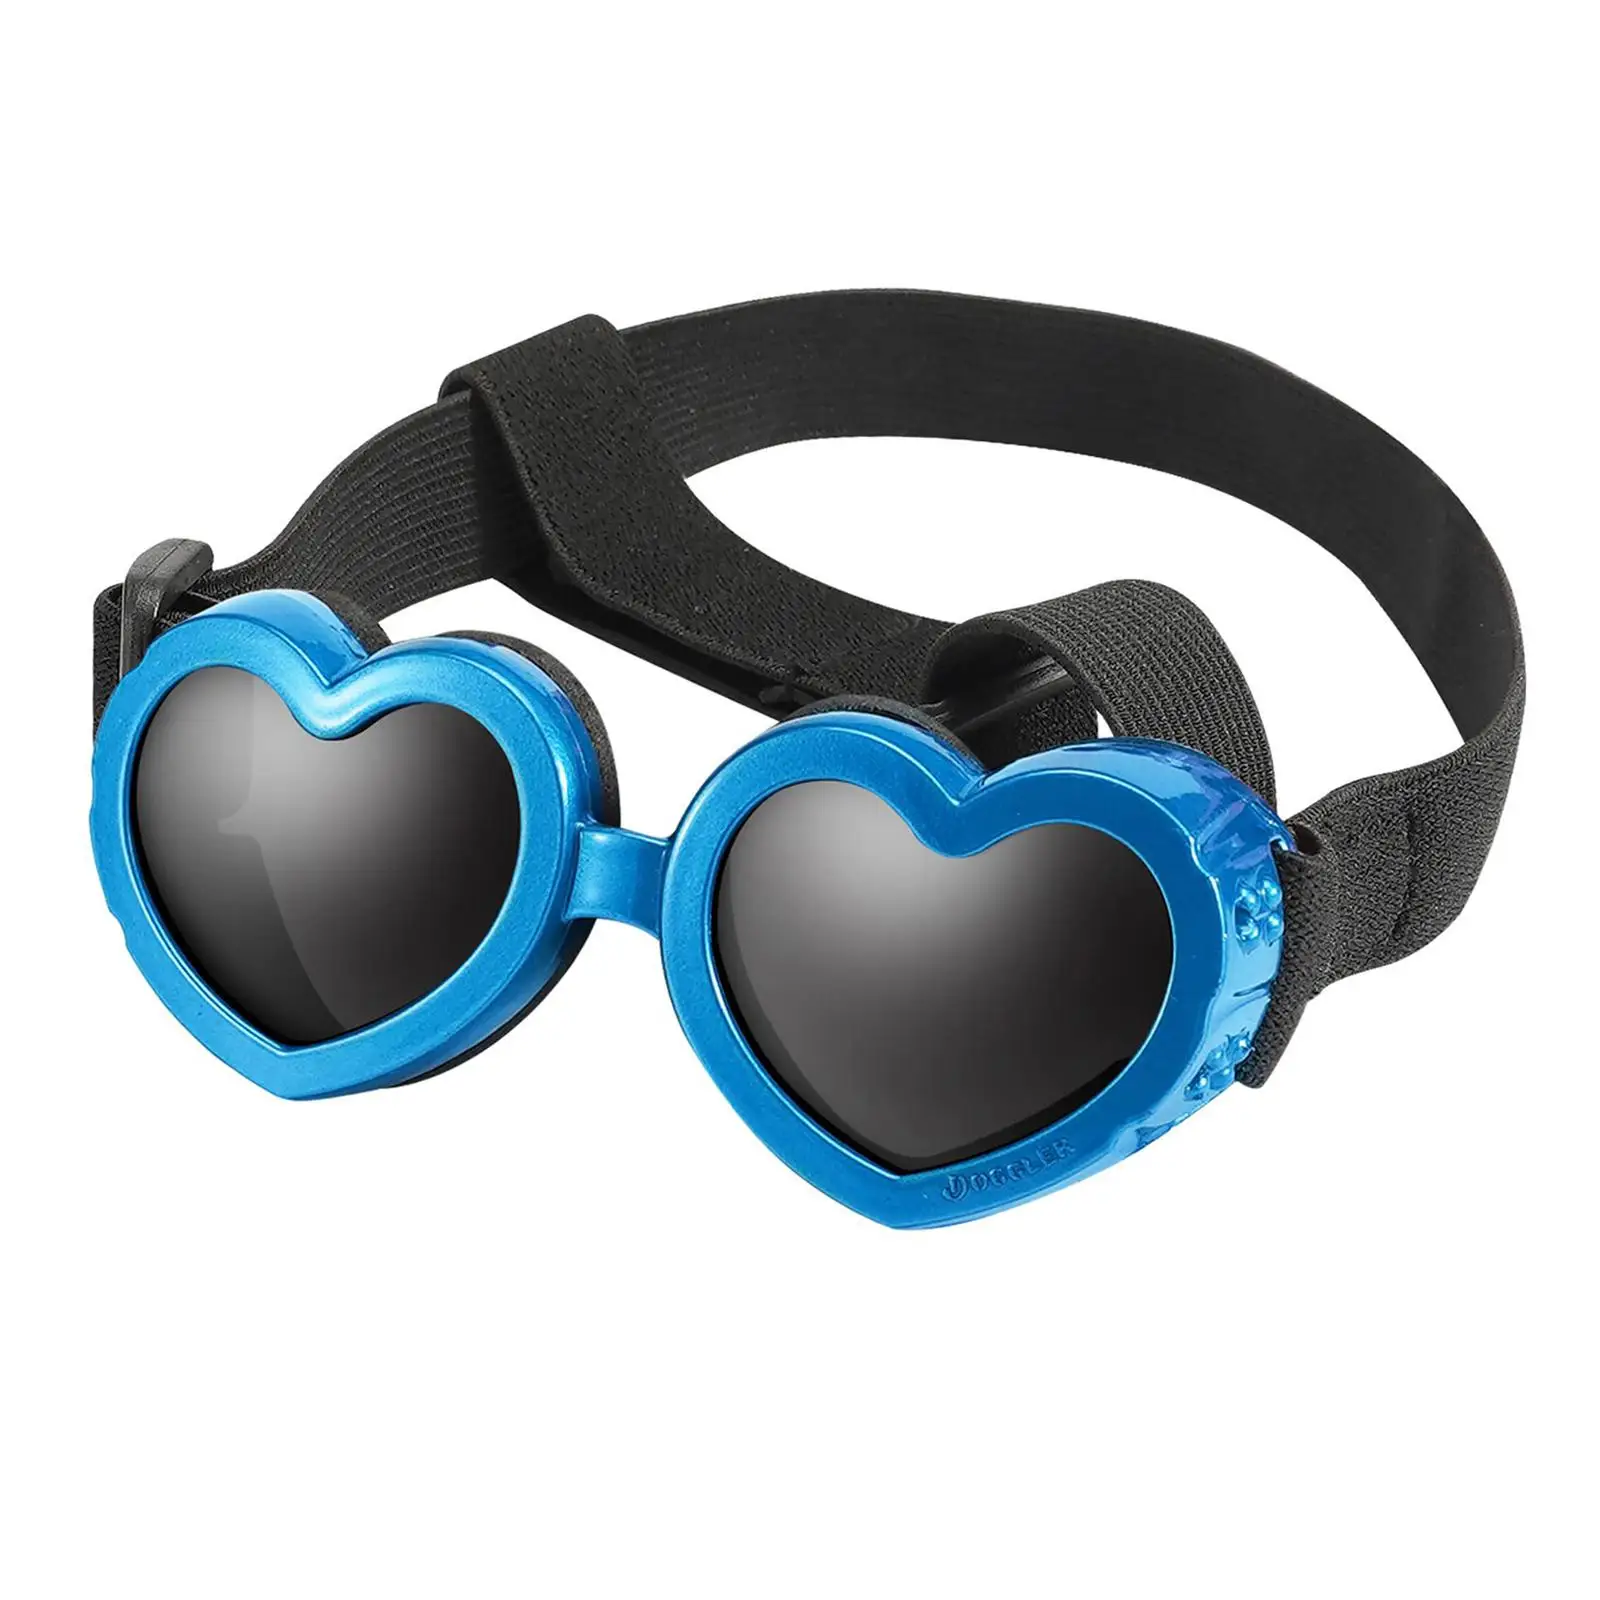 Pet Dog Sunglasses Heart Shape with Adjustable Belt Eye Protection Goggles Eyewear for Photos Props Puppy Dogs Doggy